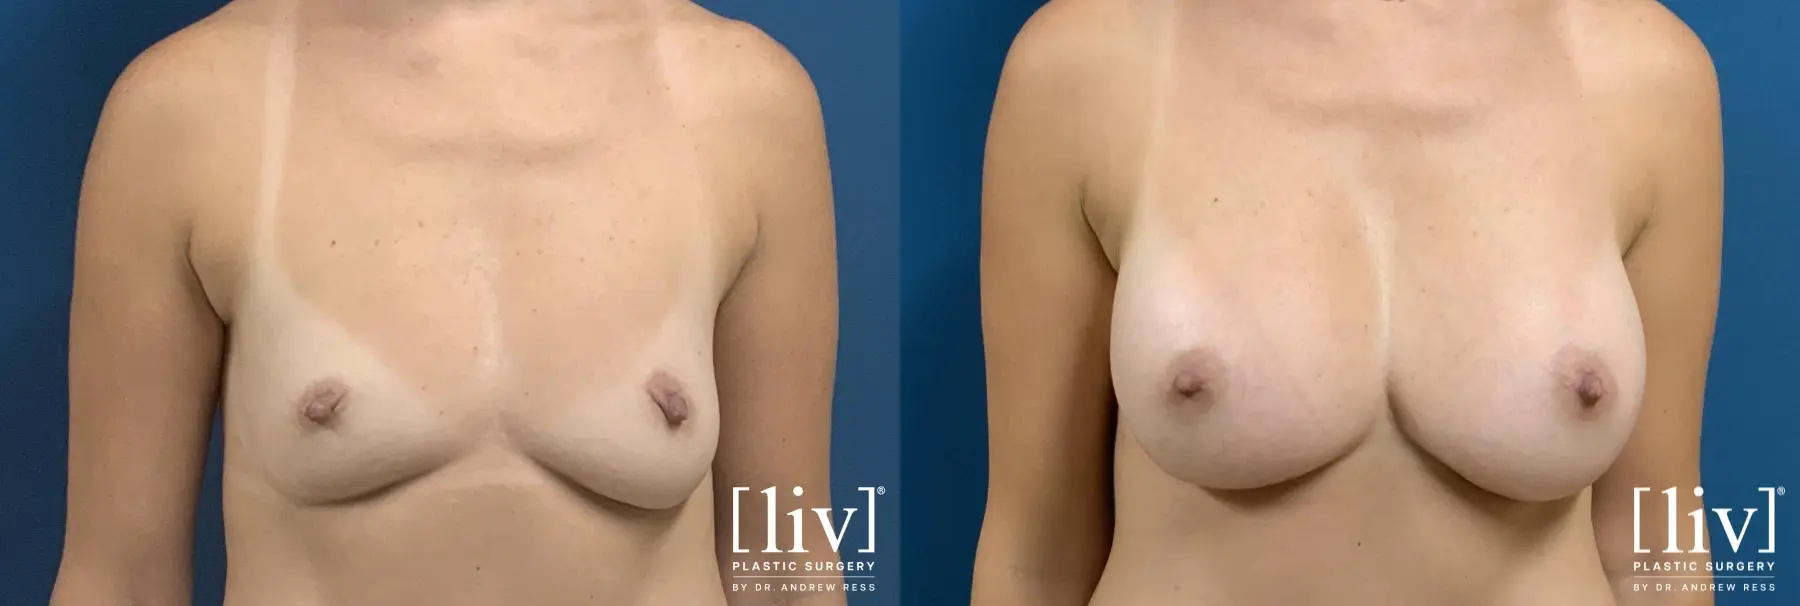 Breast Augmentation: Patient 3 - Before and After  